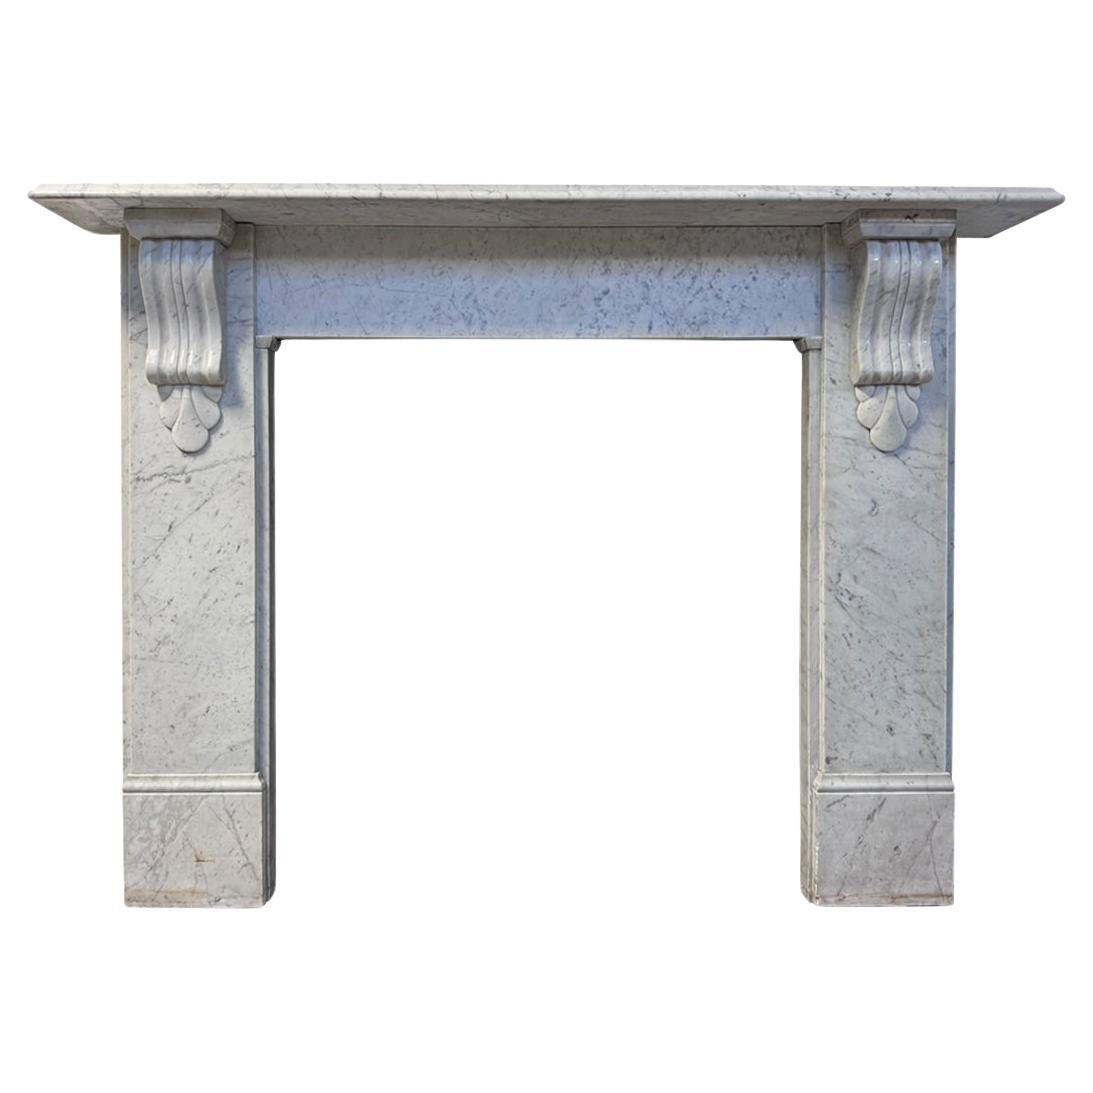 Reclaimed Victorian Corbelled Carrara marble fireplace surround